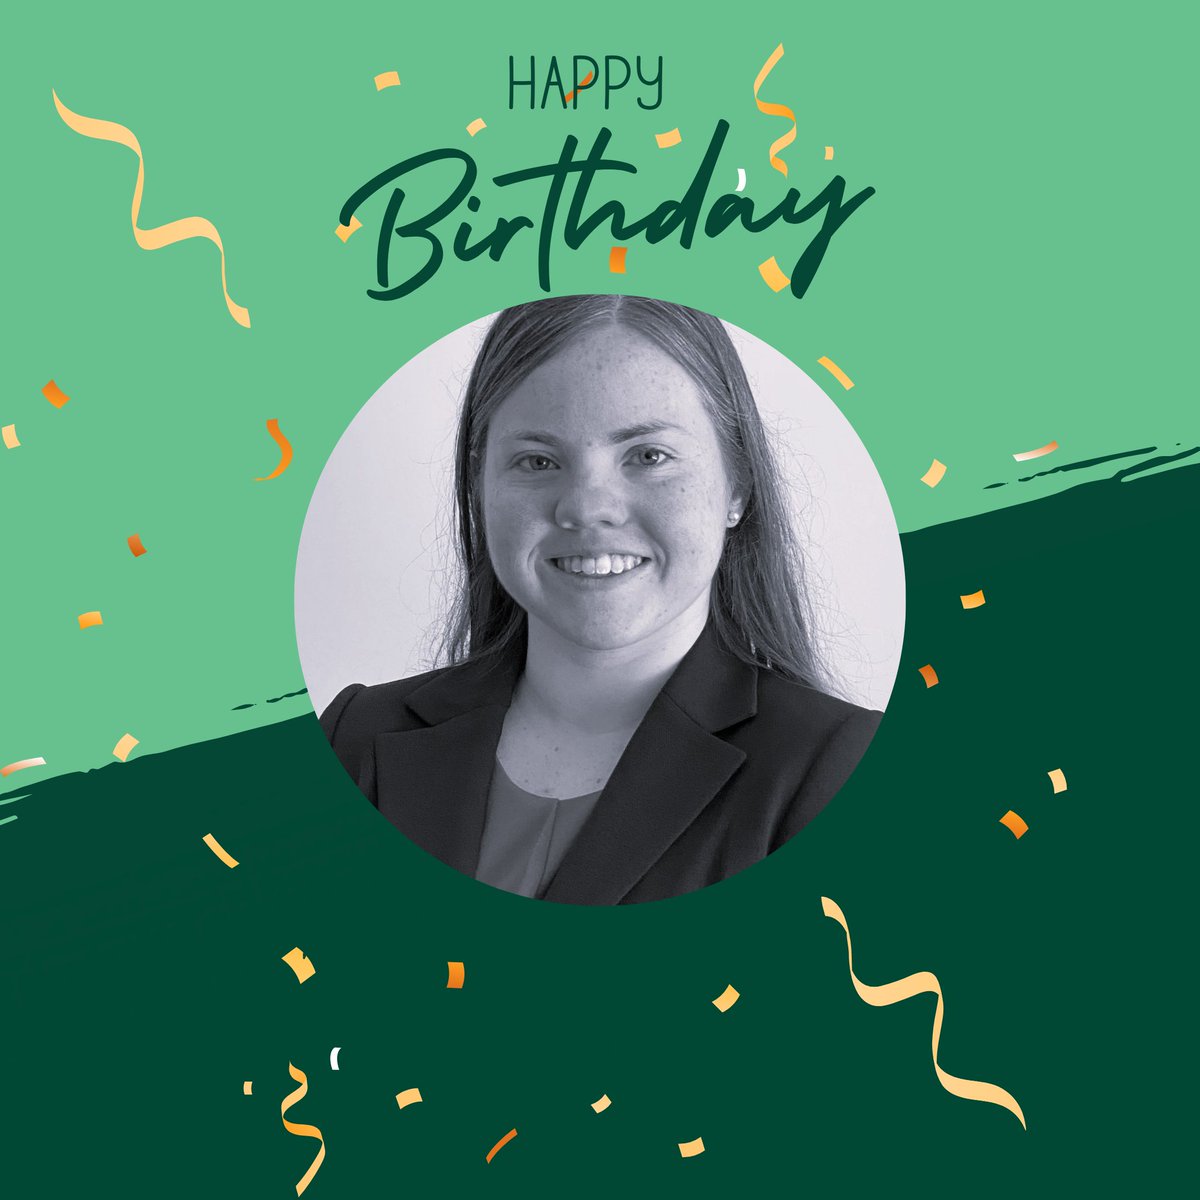 Happy Birthday Staff Attorney Lindsey Tyndall! To learn more about Lindsey's journey, read her bio: loom.ly/aEbGkwE #beyonddiagnosis #medicalbills #cancer #canceradvocacy #healthcarefinances #CancerAwareness #CancerPatient #CancerSurvivorship #CancerCare #CancerSurvivor